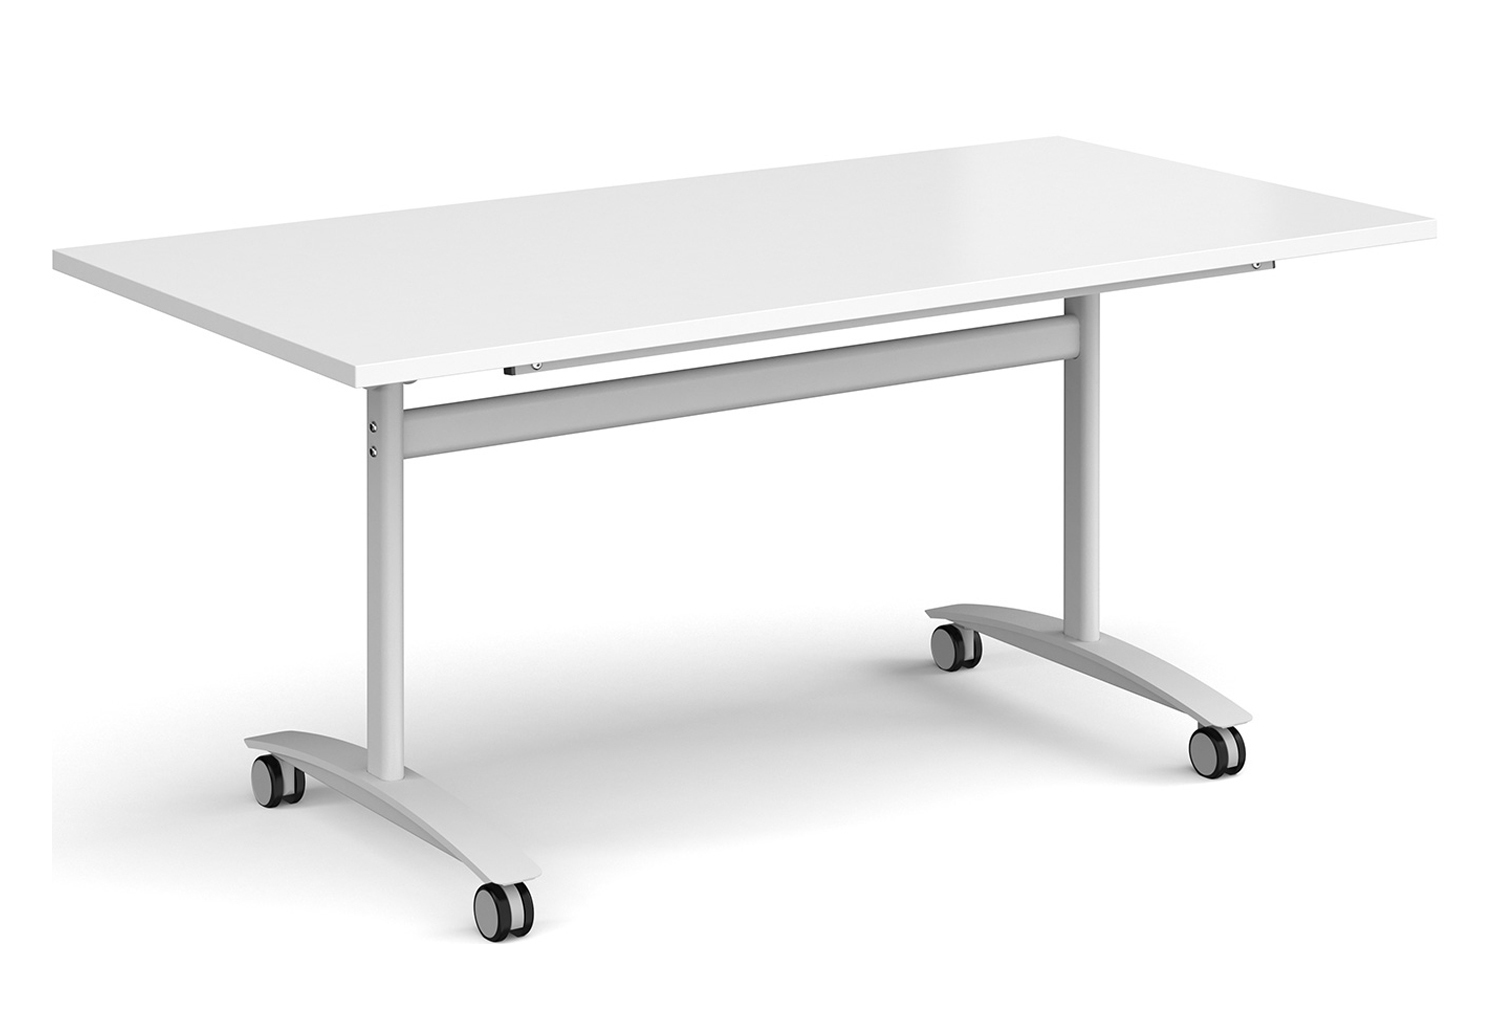 Carousel Rectangular Flip Top Meeting Tables, 160wx80dx73h (cm), White Frame, White, Express Delivery